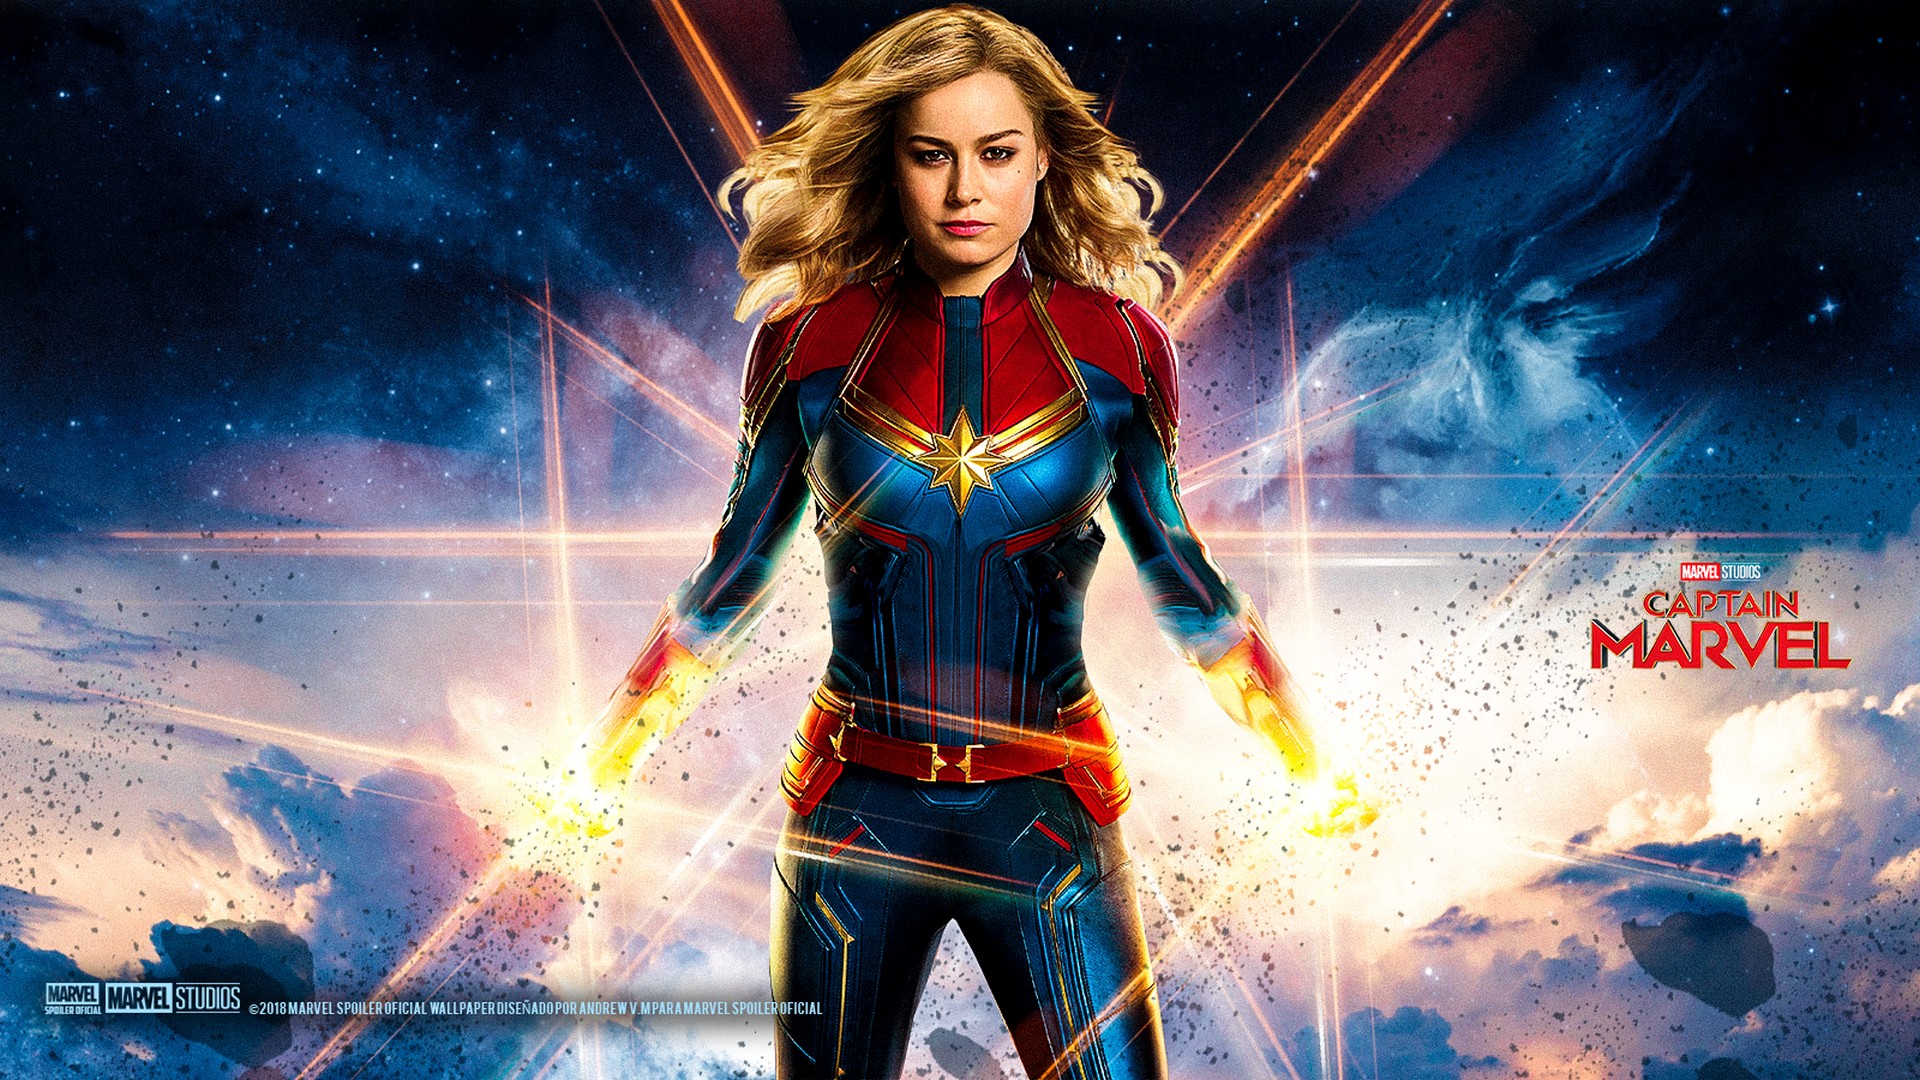 Captain Marvel Movie Wallpaper with high-resolution 1920x1080 pixel. You can use this poster wallpaper for your Desktop Computers, Mac Screensavers, Windows Backgrounds, iPhone Wallpapers, Tablet or Android Lock screen and another Mobile device